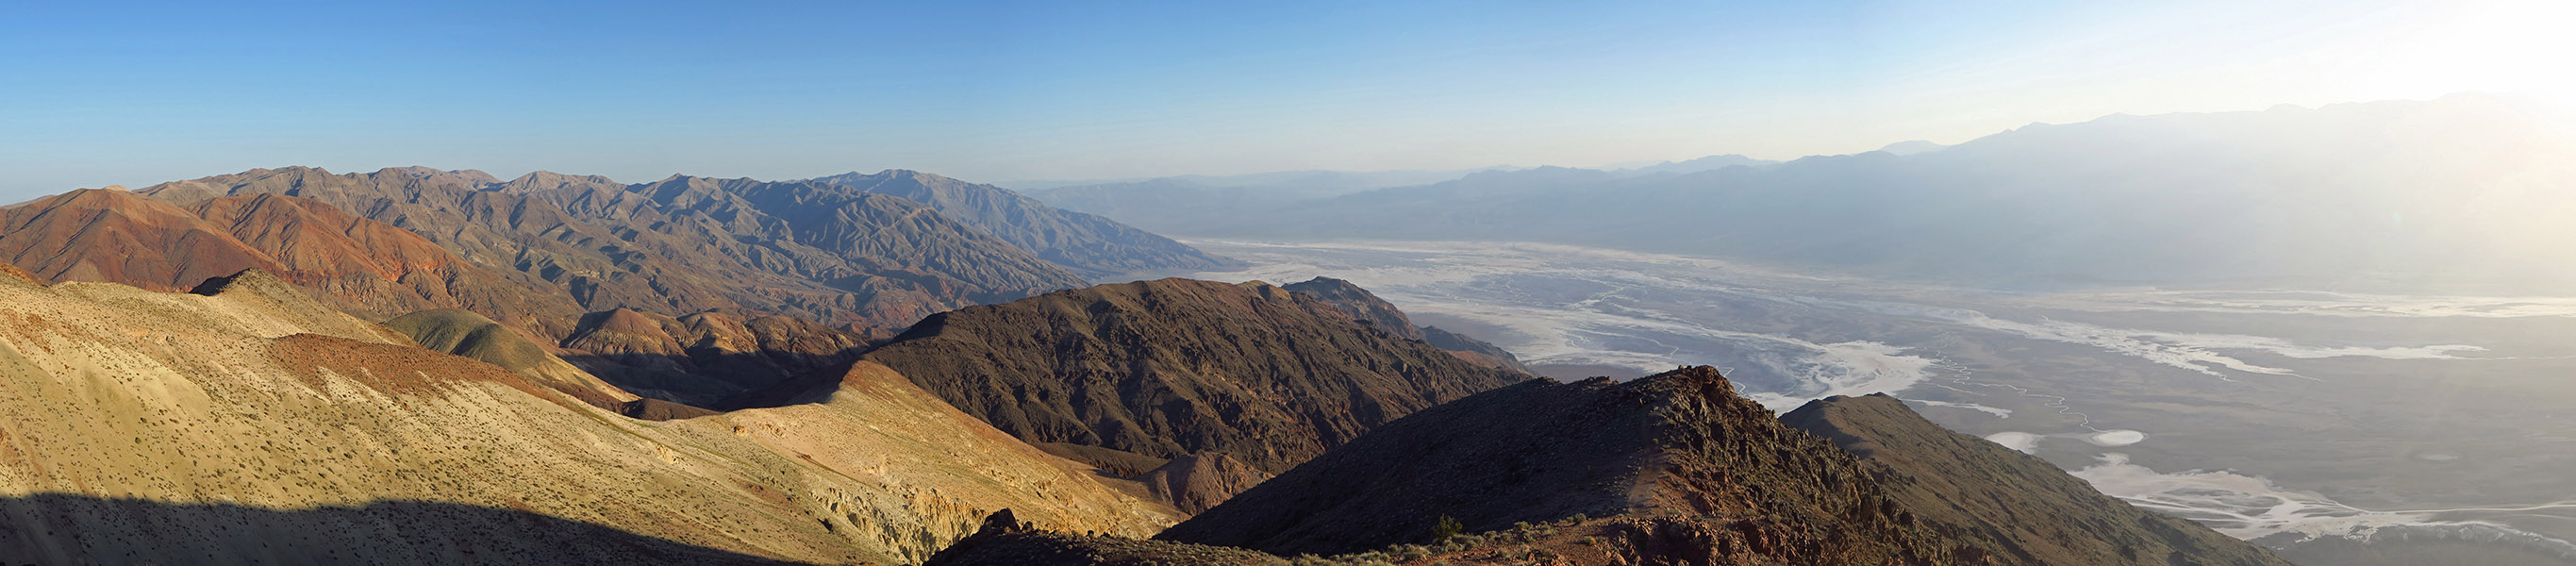 Dante's View panorama [Dante's View, Death Valley National Park, Inyo County, California]